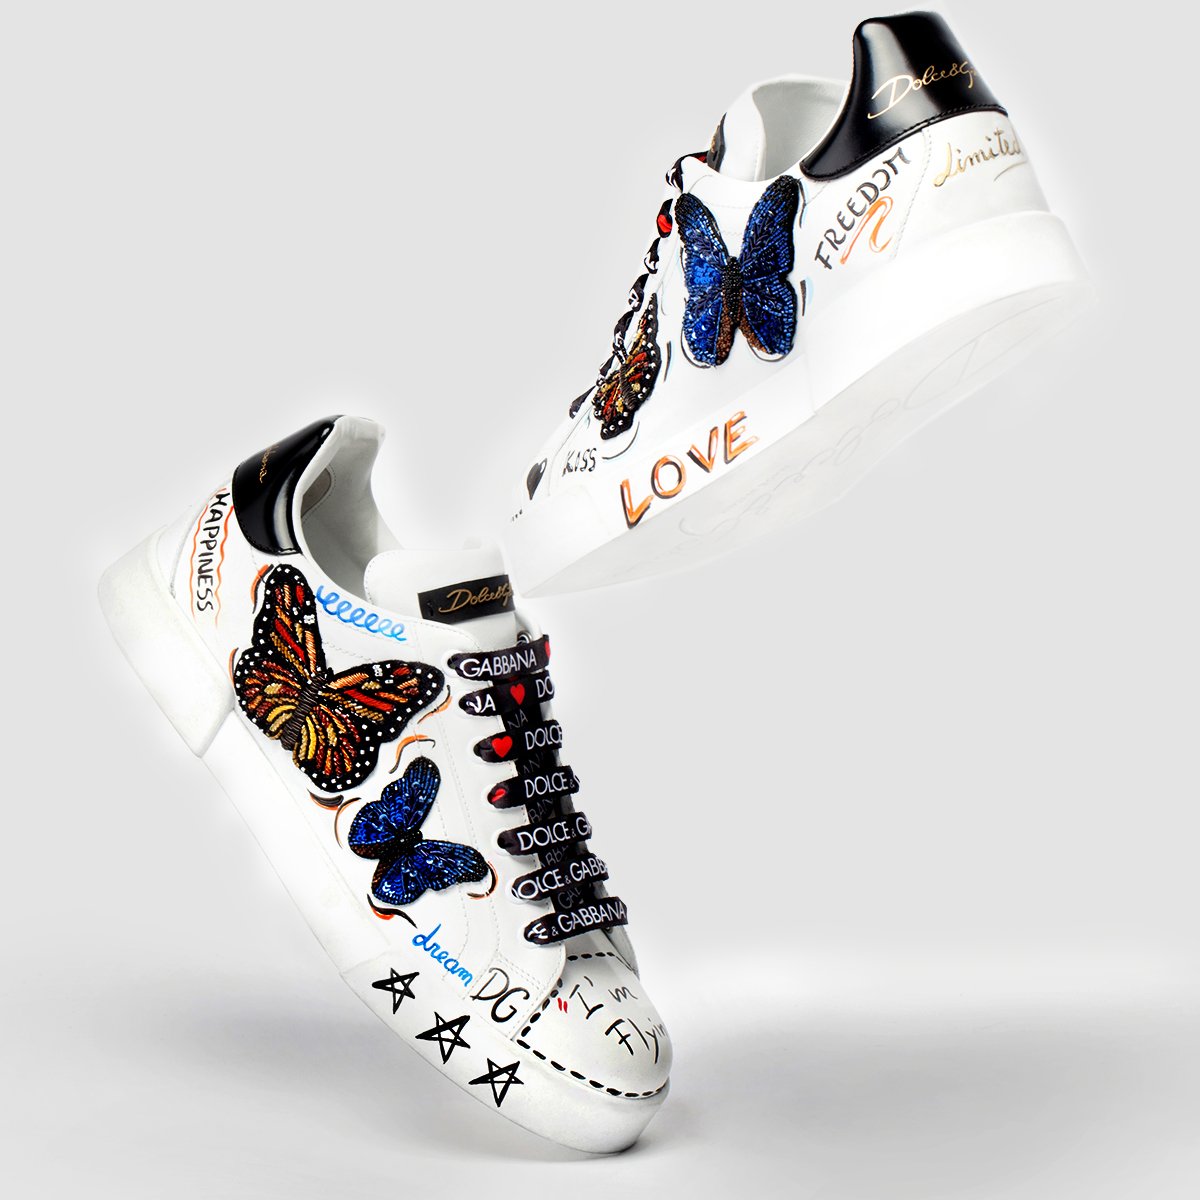 Somatische cel Protestant Implementeren Dolce & Gabbana on Twitter: "Only this month, butterfly patches decorate  the #DGLimited sneakers, exclusively available on the online store. One of  a kind, be one of the few to have this